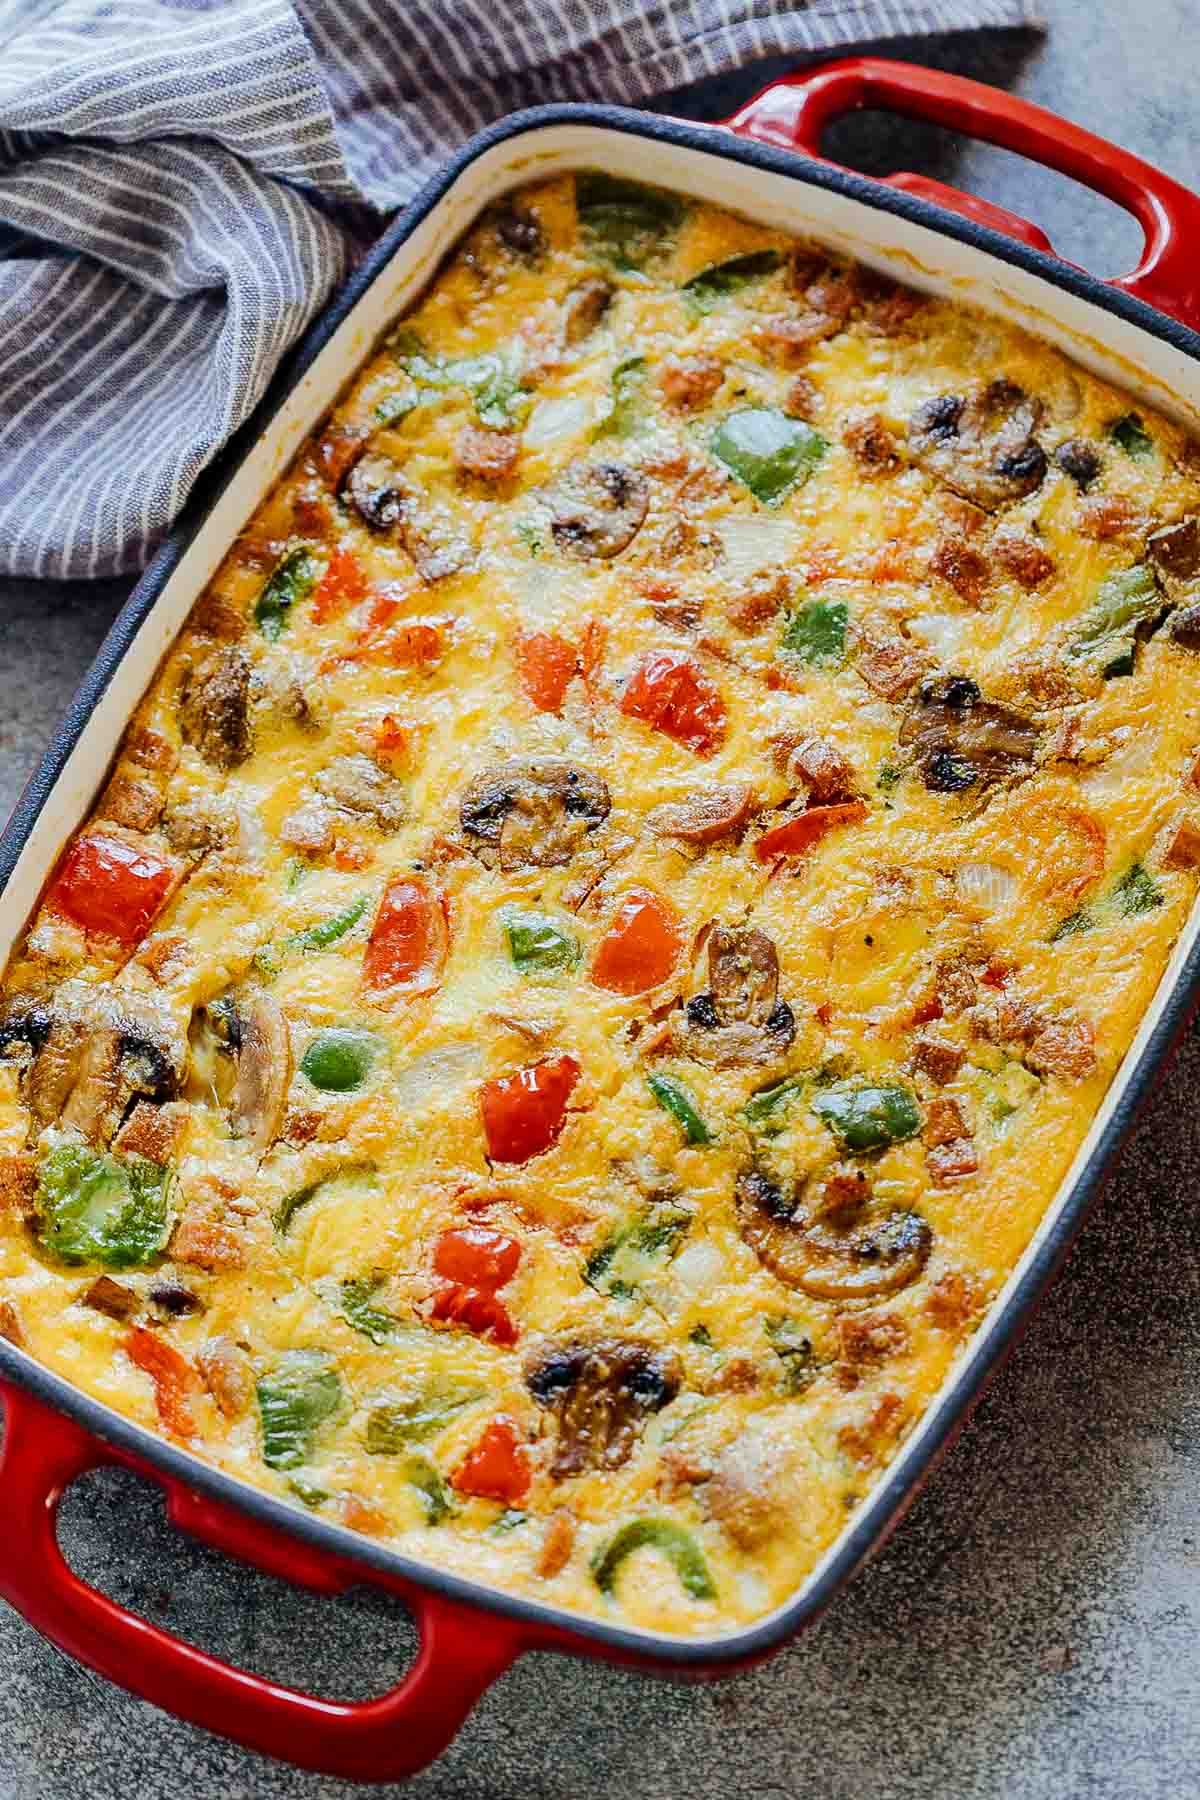 Baked Denver Omelet Breakfast Casserole in a baking dish straight out of the oven